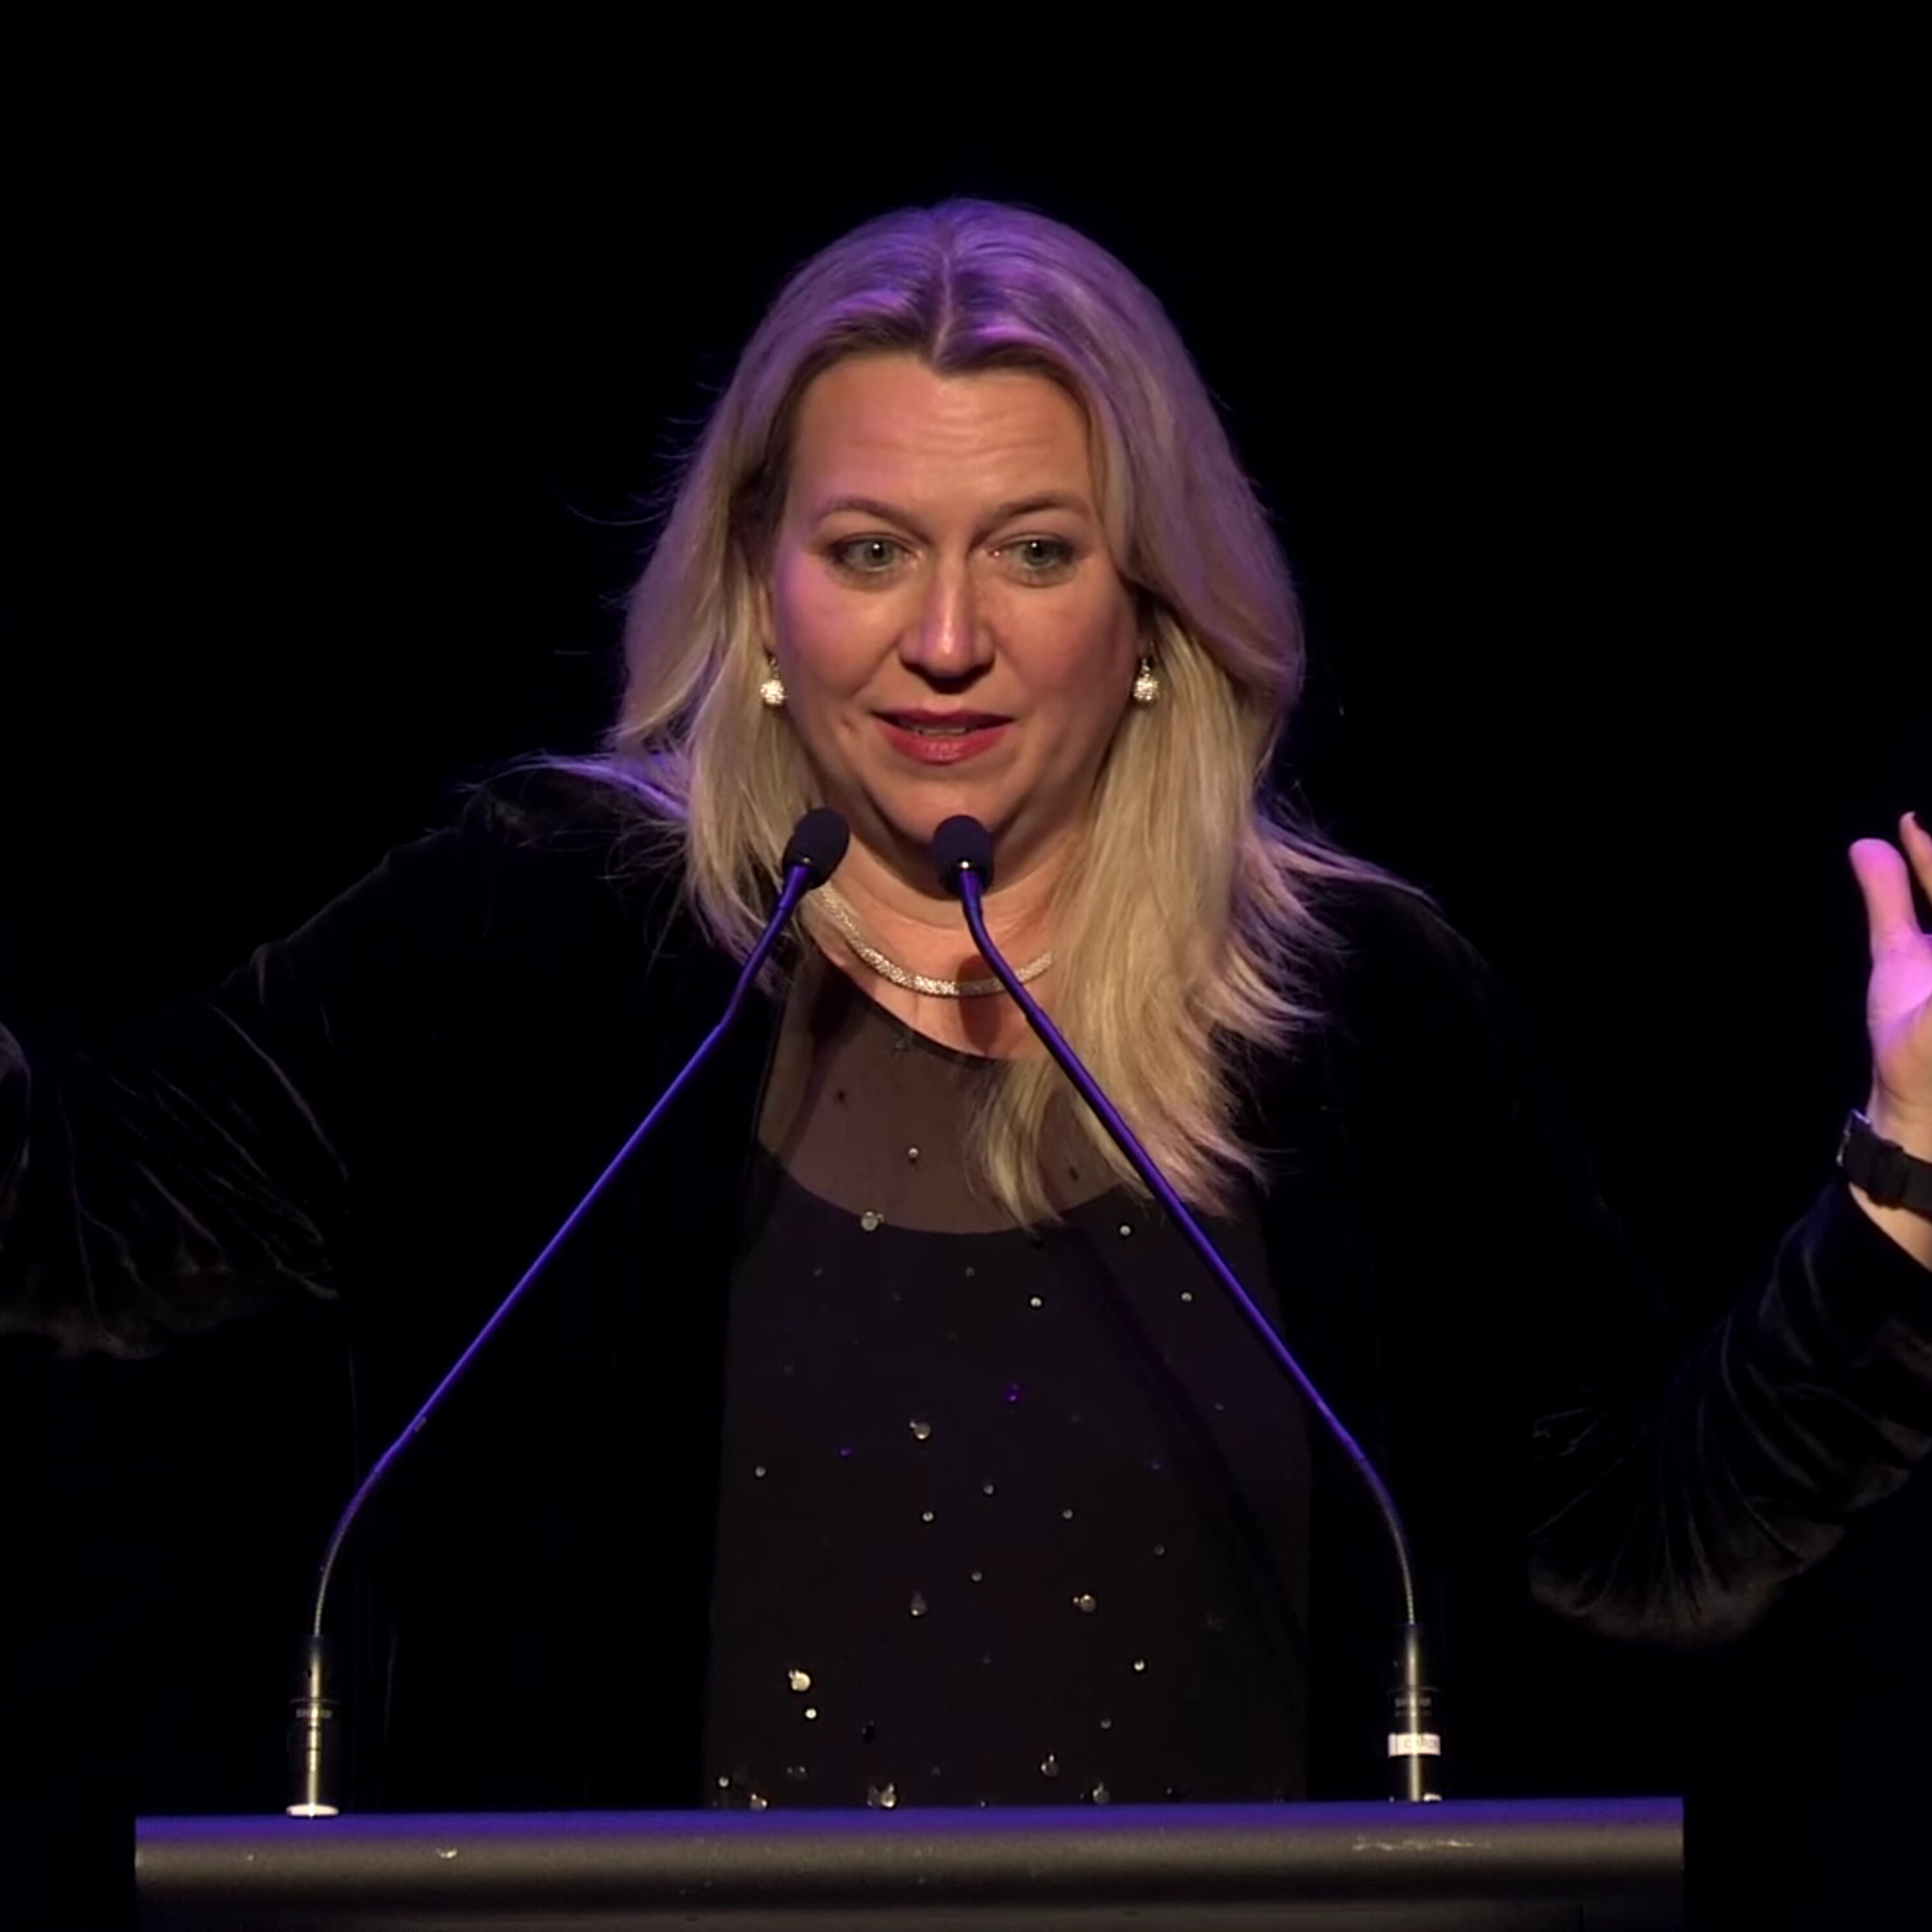 One last question: Cheryl Strayed, on jumping off mountains